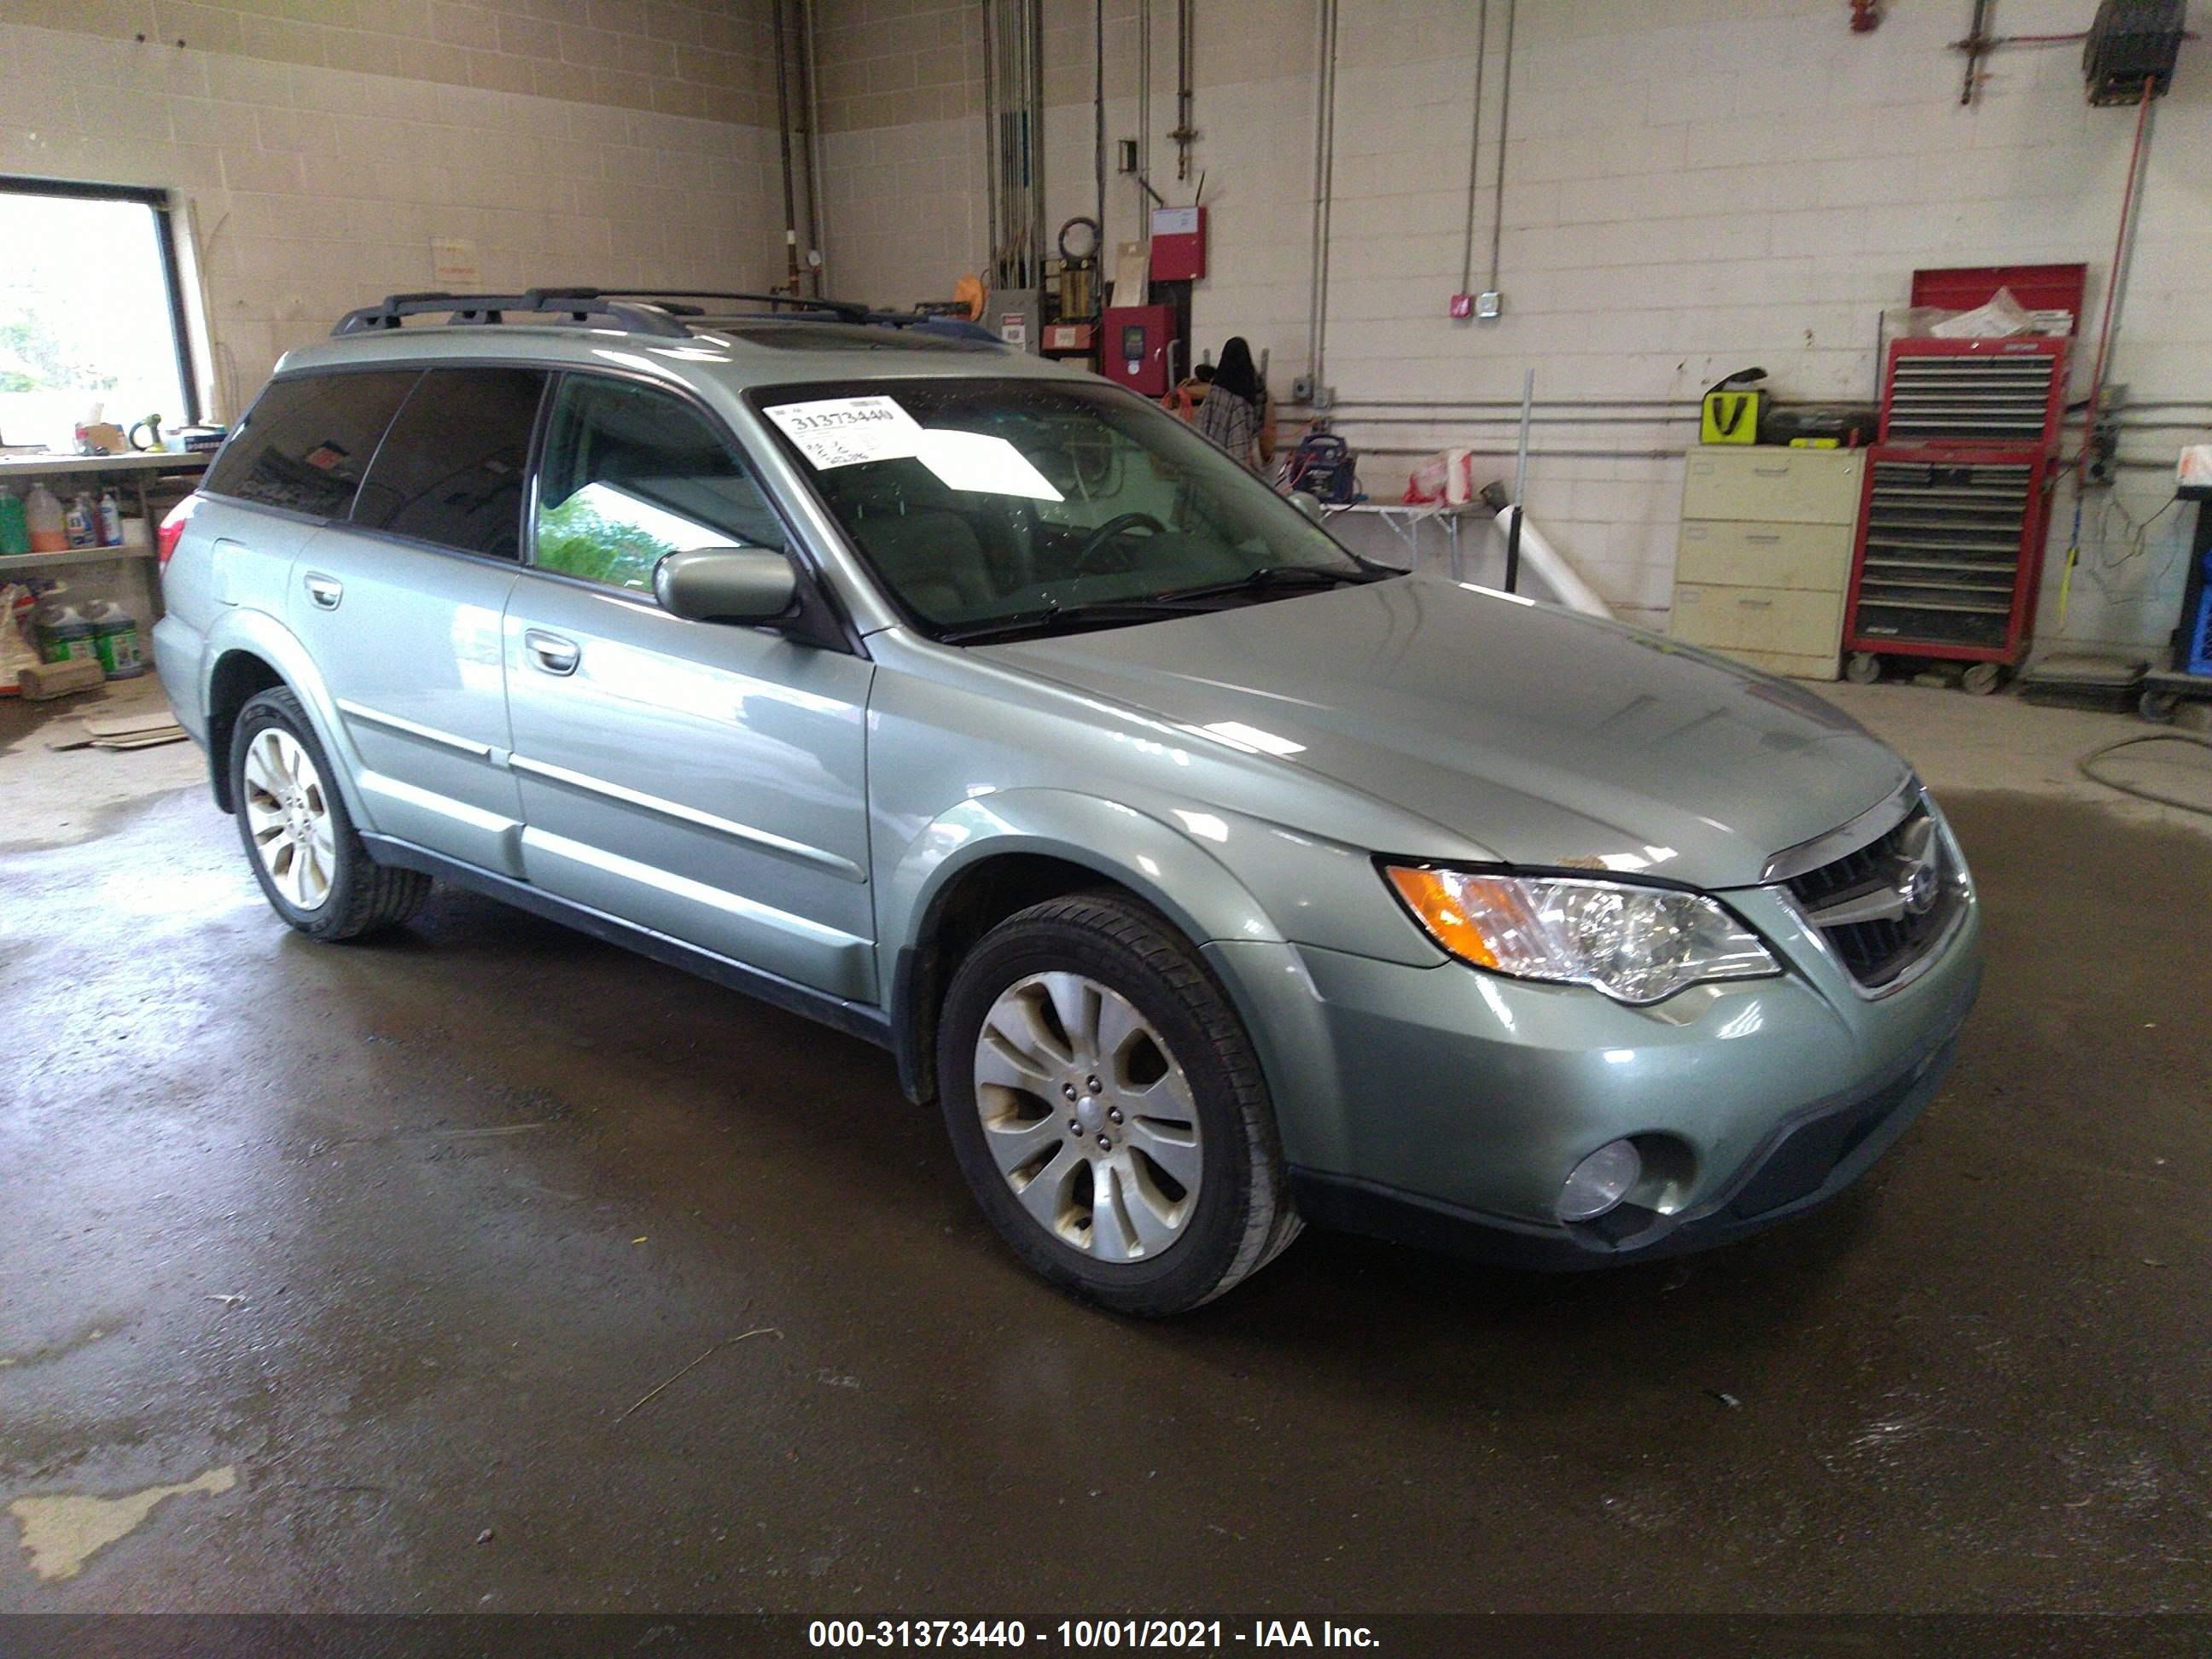 vin: 4S4BP66CX97326204 4S4BP66CX97326204 2009 subaru outback 2500 for Sale in 04038, 9 Moody Dr, Gorham, USA